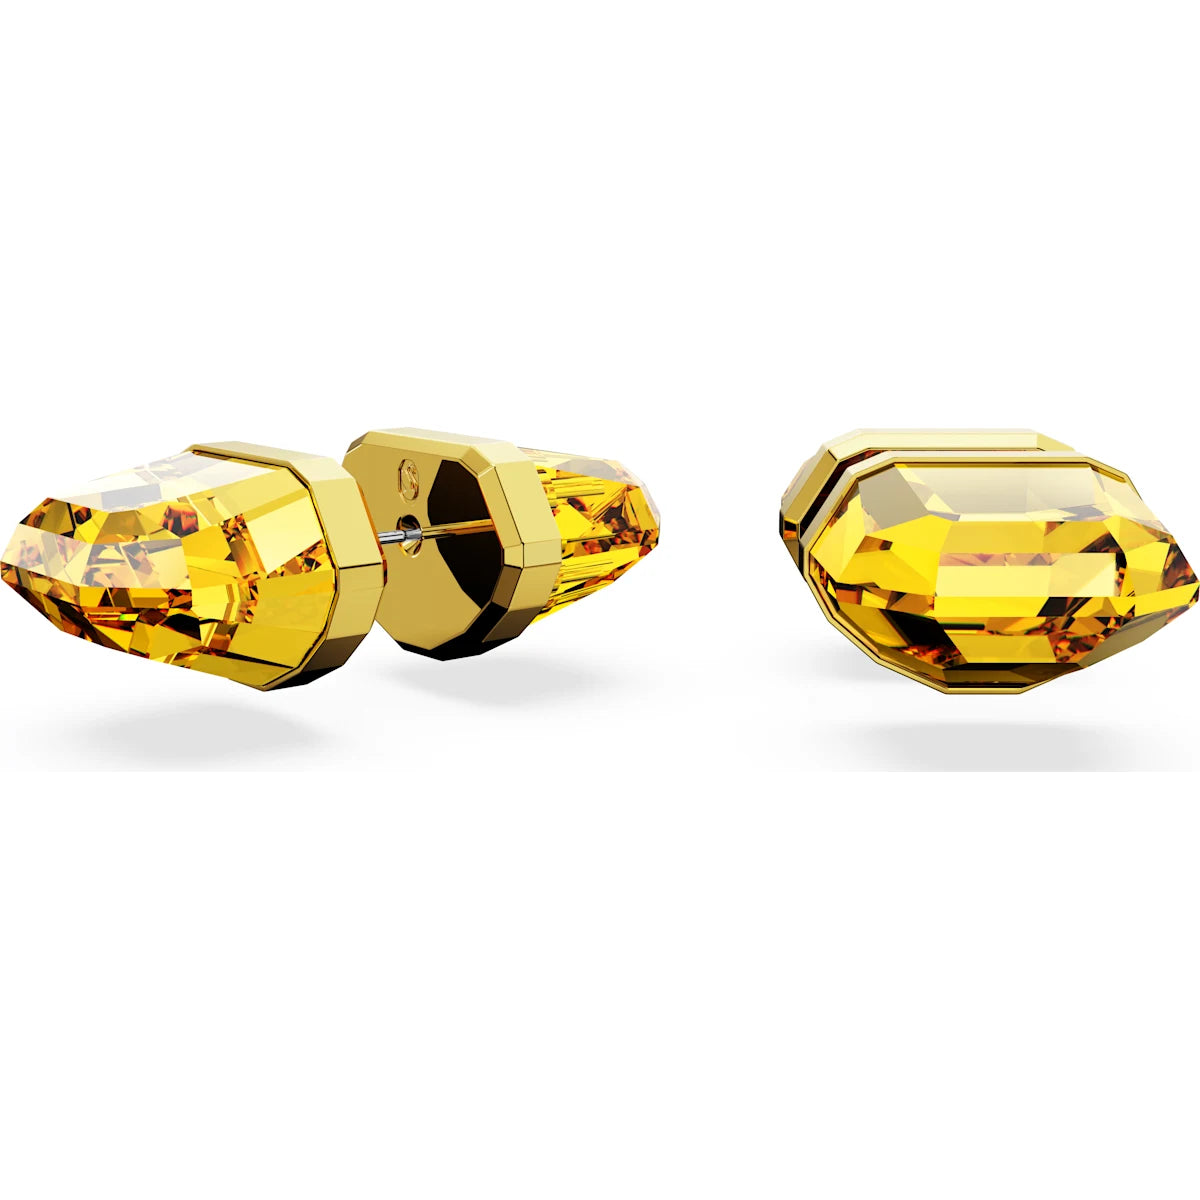 Swarovski Lucent stud earrings, Yellow, Gold-tone plated 5626605- Discontinued